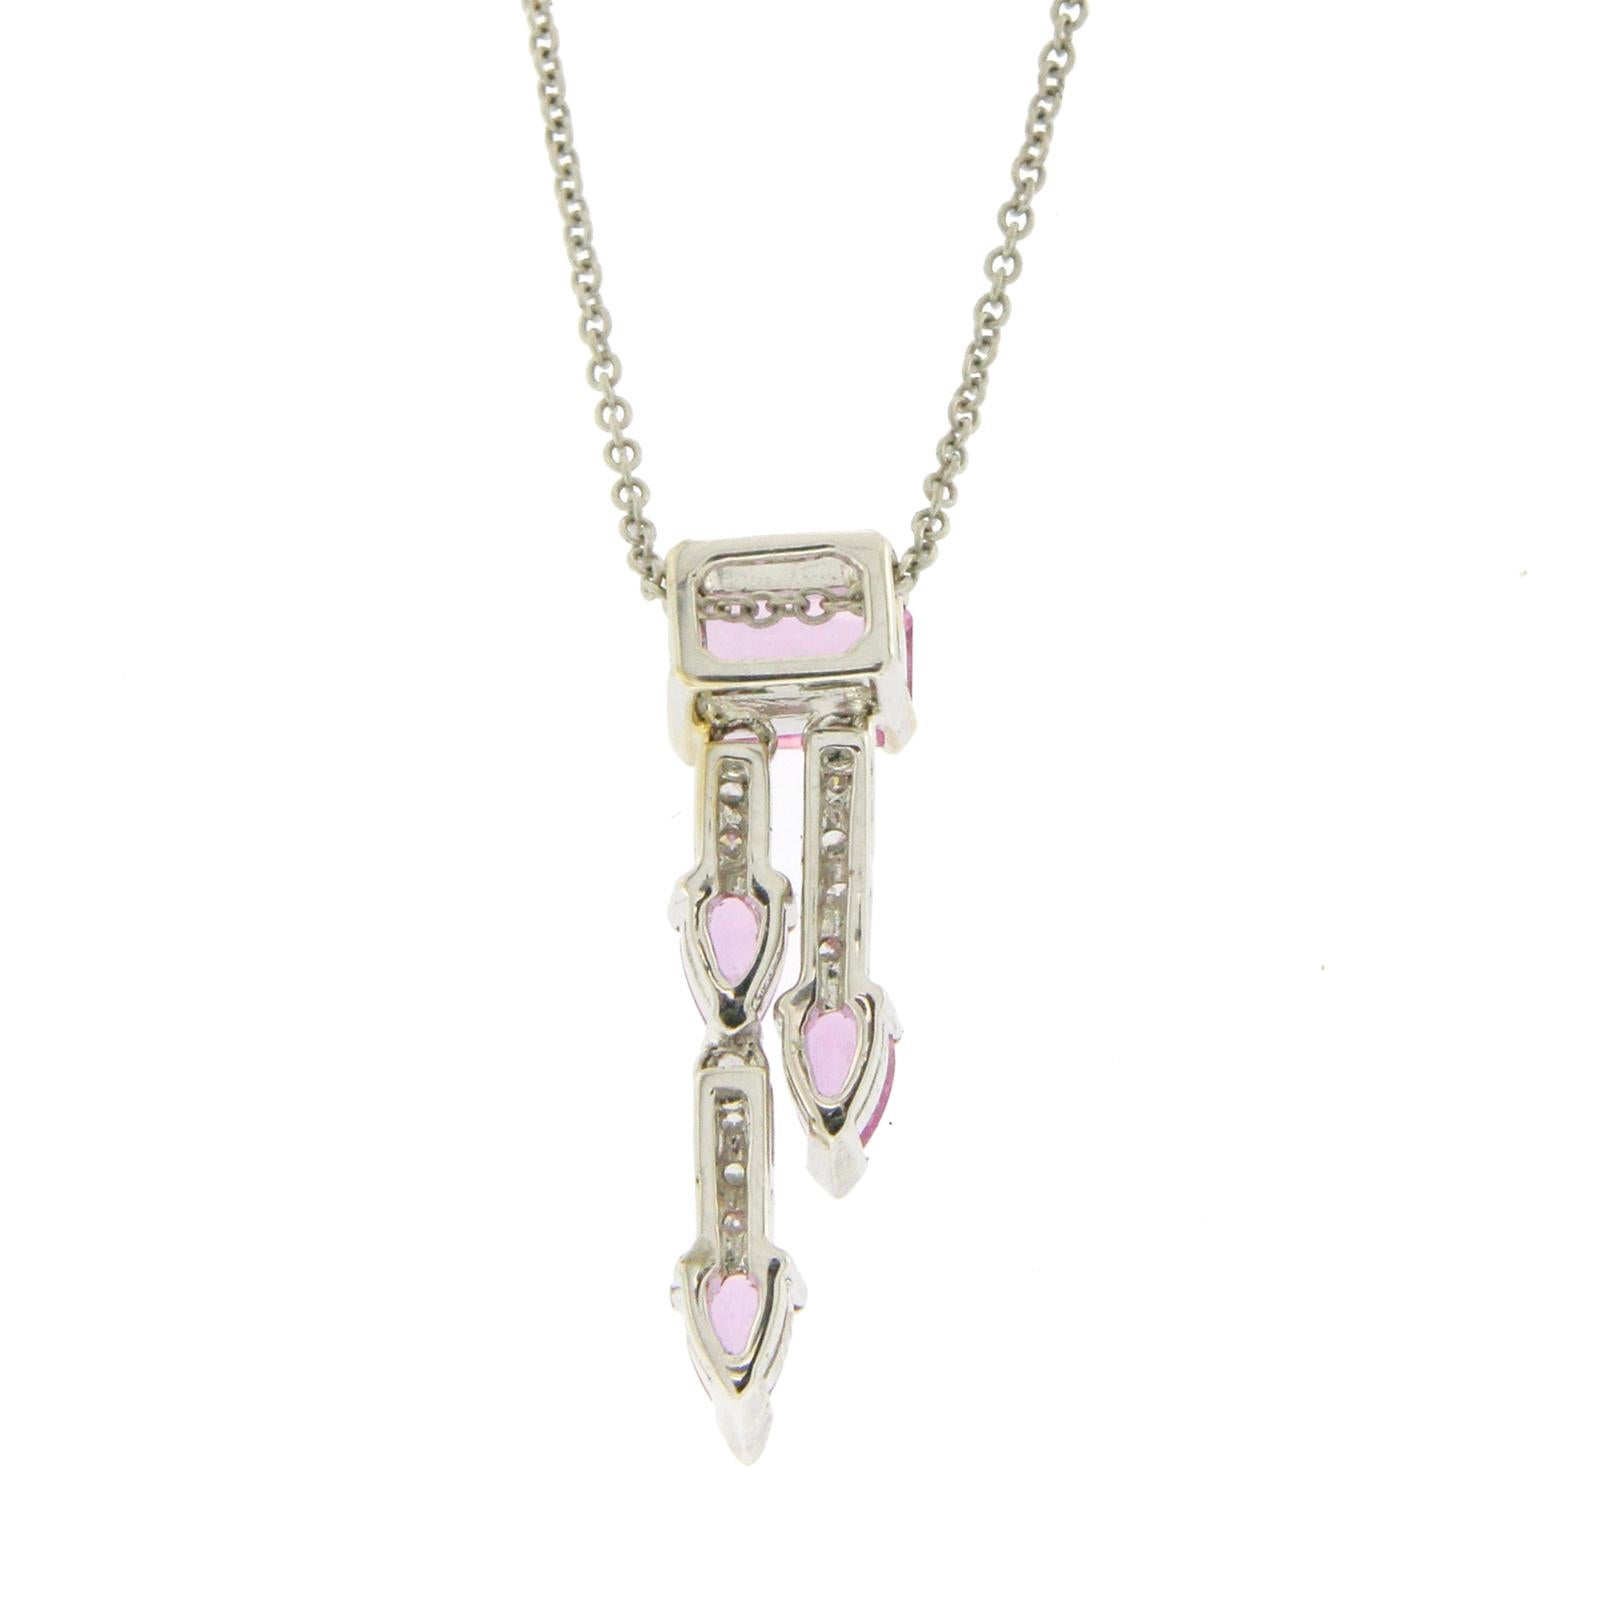 14 Karat White Gold 0.10 Carat Diamonds 1.91 Carat Pink Sapphires Necklace In Excellent Condition For Sale In Los Angeles, CA